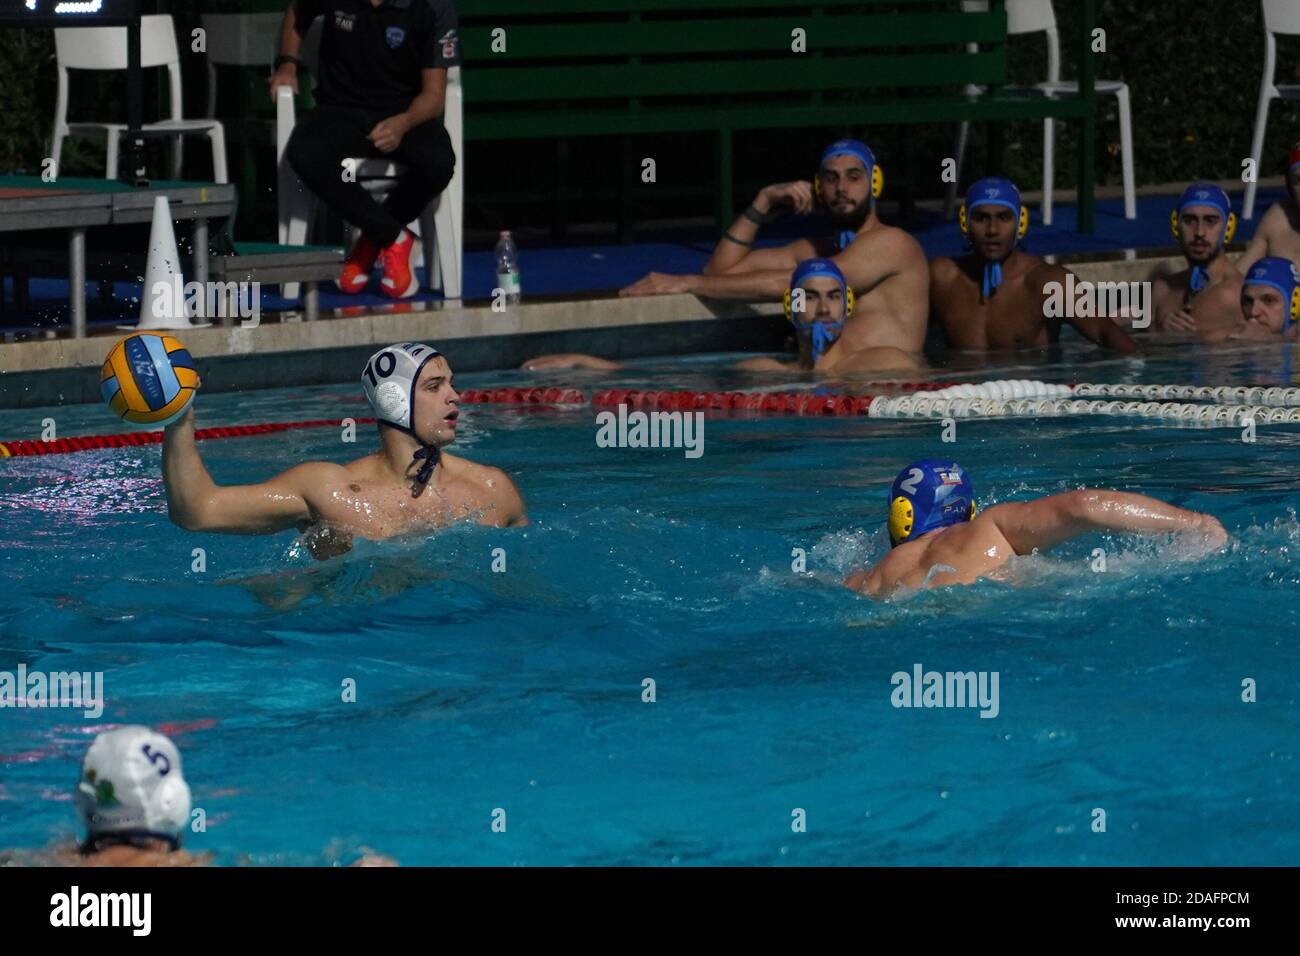 Siracusa, Italy. 12th Nov, 2020. siracusa, Italy, Paolo Caldarella pool, 12 Nov 2020, Luka Baijc (Mladost Zagreb) Thomas Saux (Pays D'Aix Natation) during Mladost vs Paus D'Aix - Waterpolo LEN Cup - Champions League Men match - Credit: LM/Salvo Barbagallo Credit: Salvo Barbagallo/LPS/ZUMA Wire/Alamy Live News Stock Photo